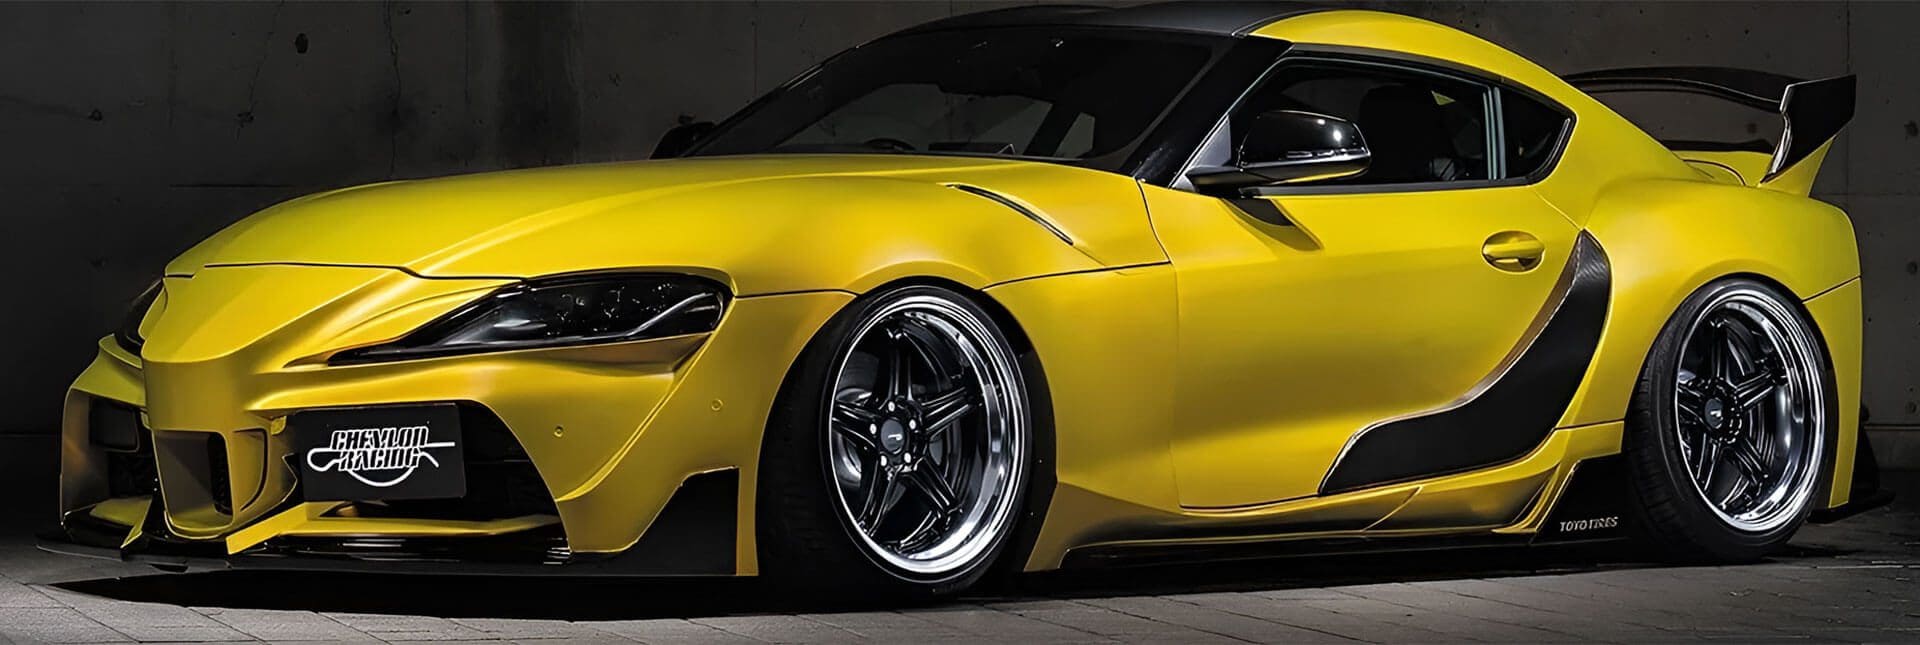 A yellow sports car with black wheels parked in a parking lot.